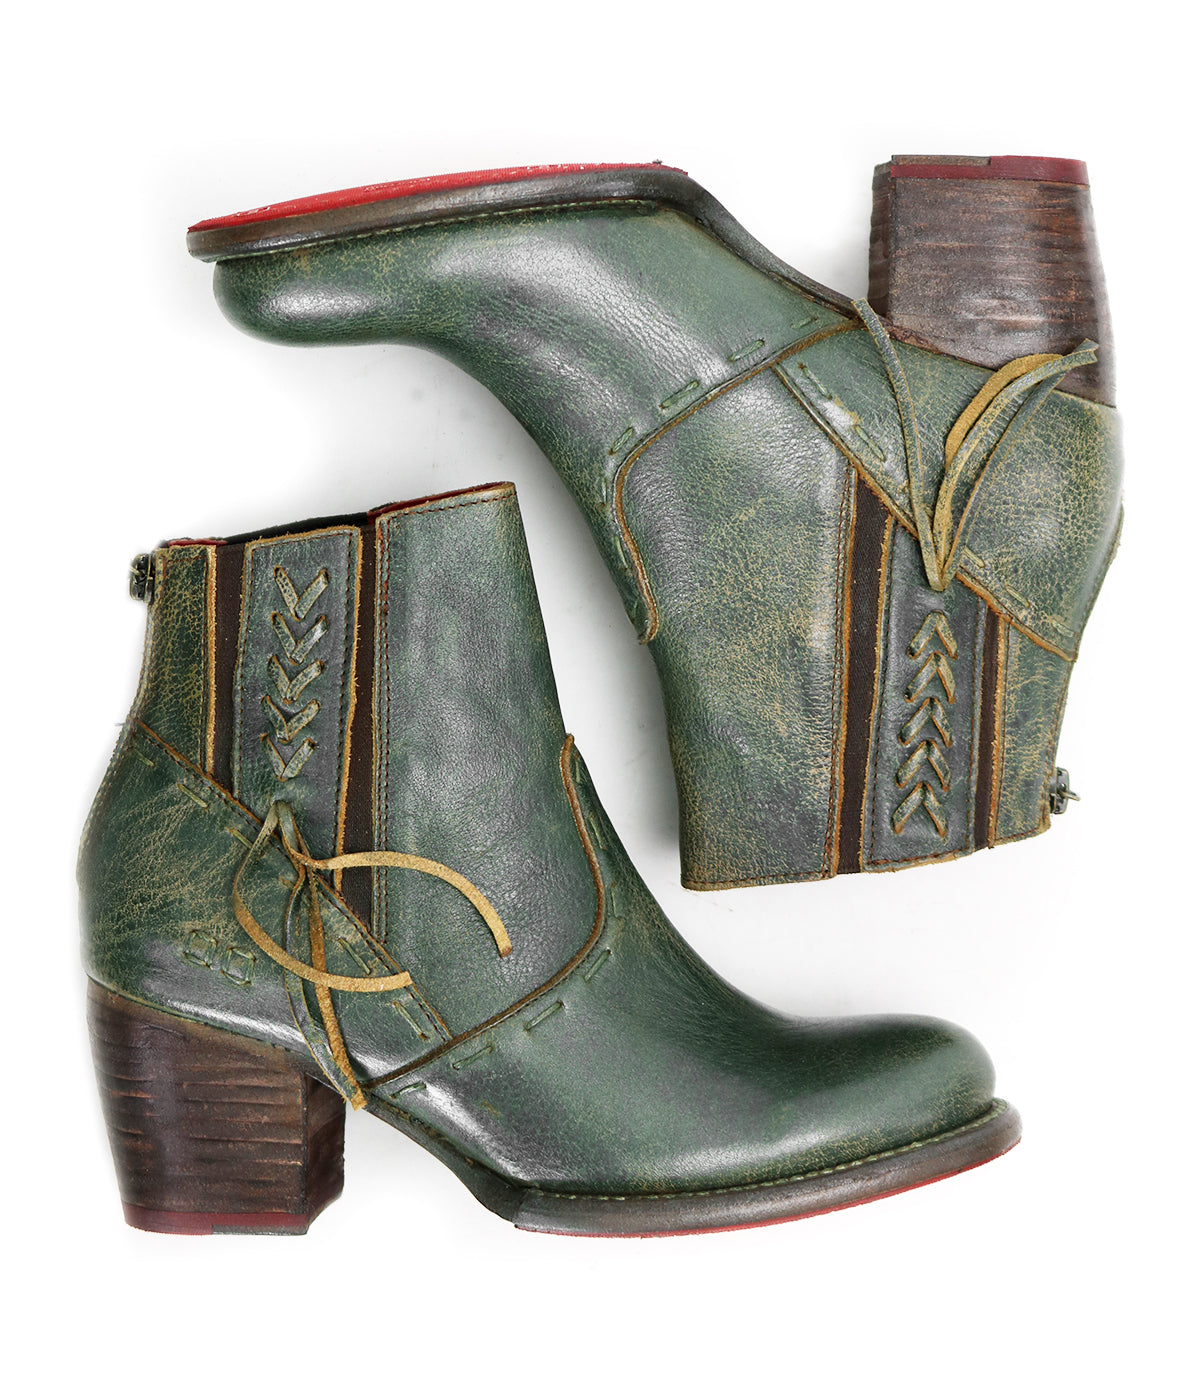 A pair of Celestine green leather ankle boots by Bed Stu.